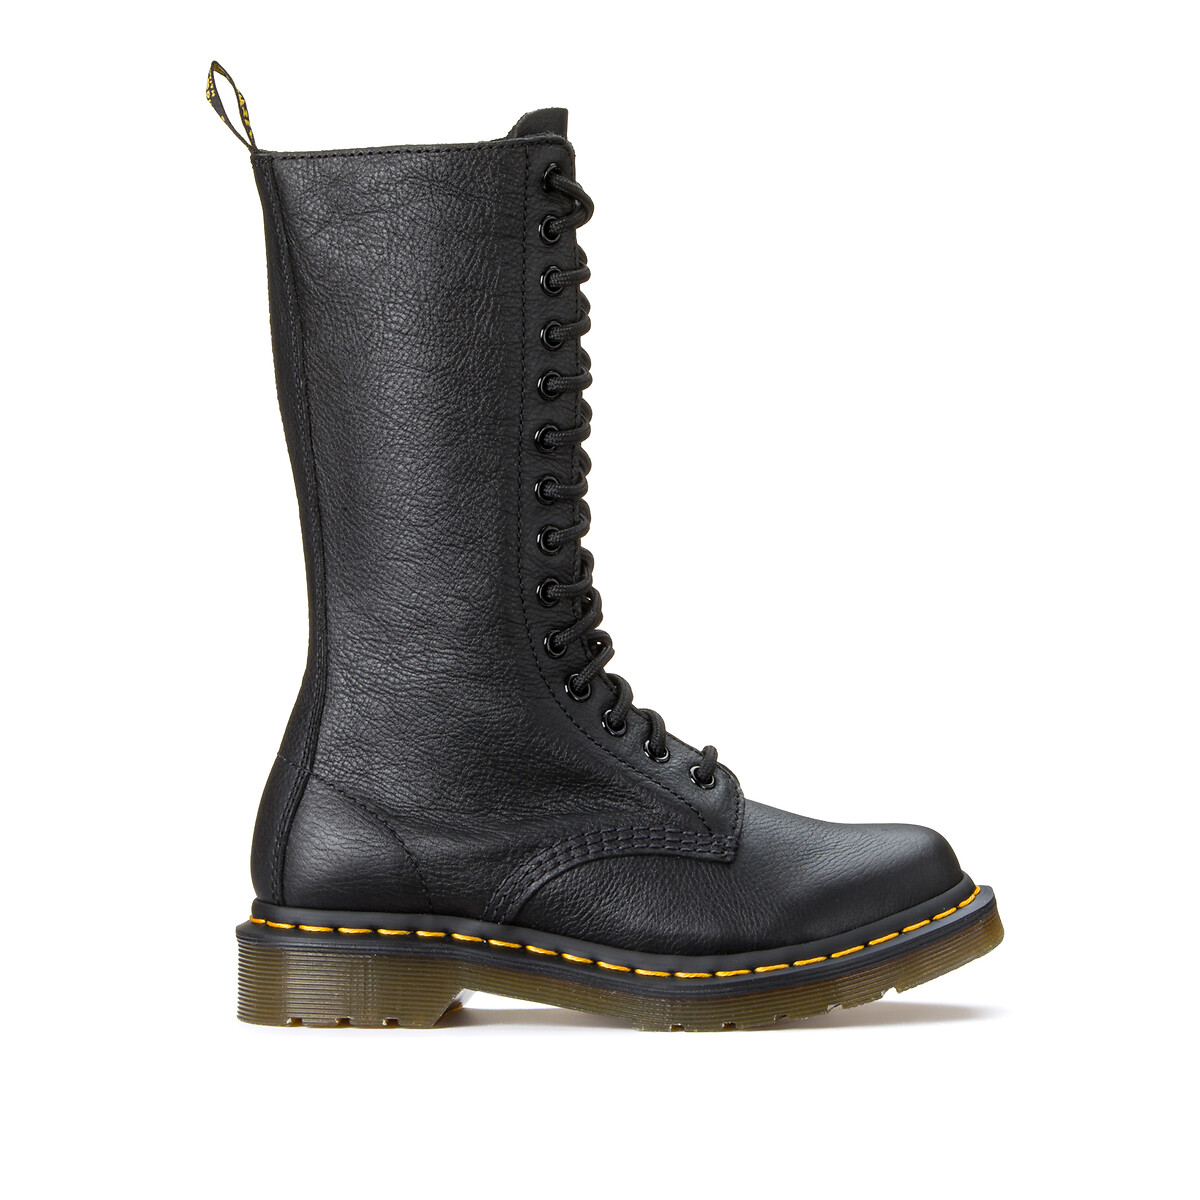 1b99 virginia calf boots in leather, black, Dr. Martens | La Redoute